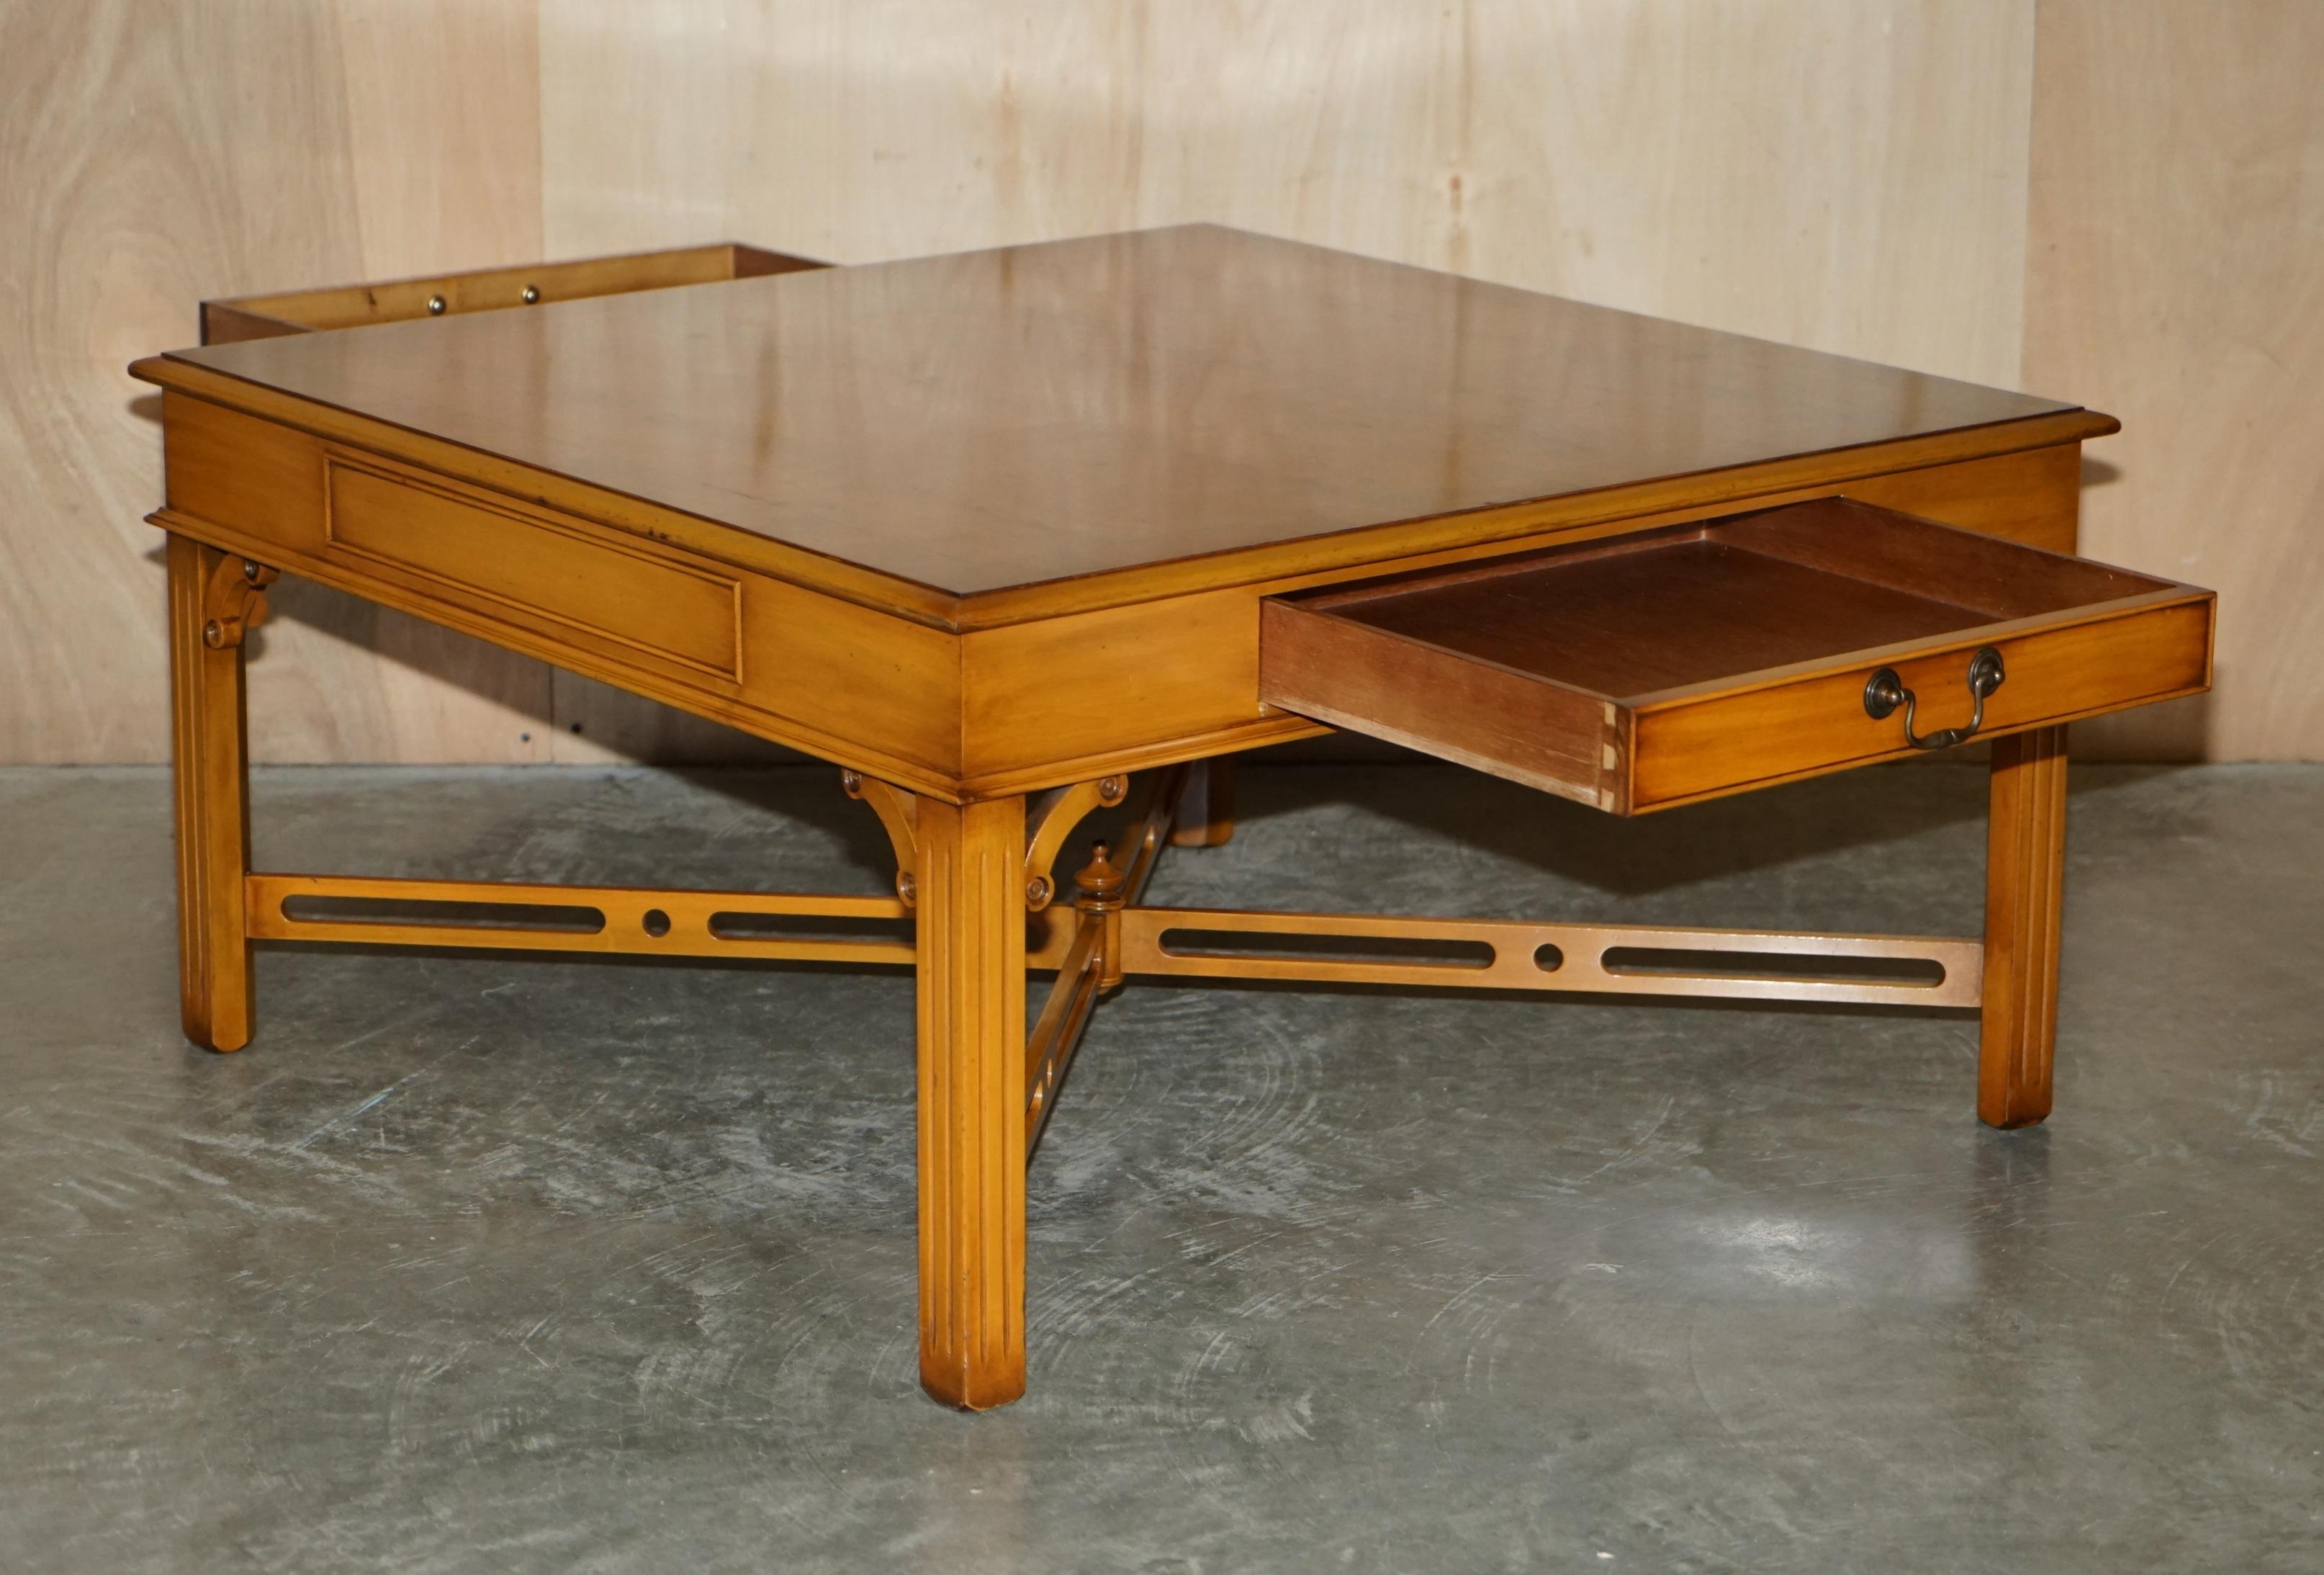 LOVELY BURR YEW WOOD TWO DRAWER COFFEE TABLE WiTH THOMAS CHIPPENDALE STRETCHES im Angebot 9